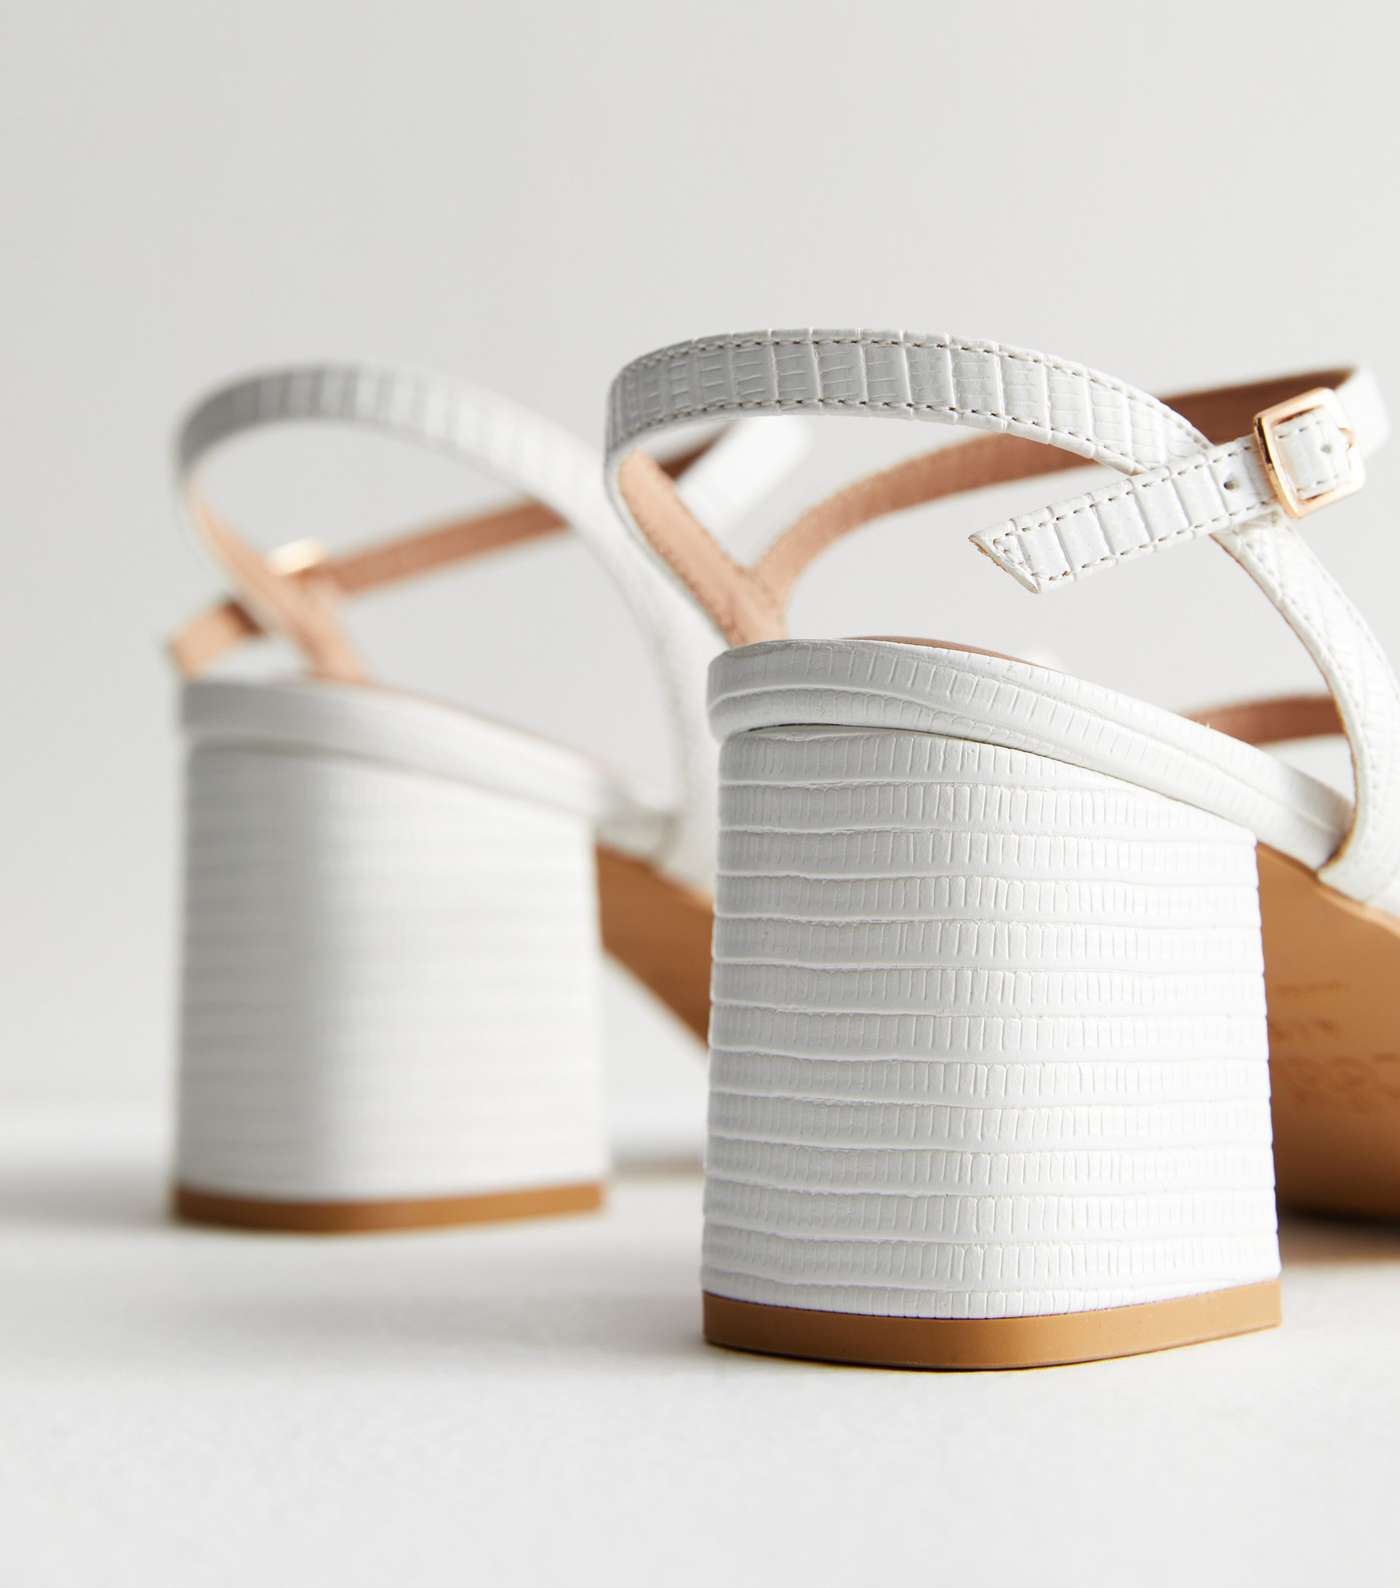 Wide Fit White Leather-Look Strappy Block Heel Sandals Image 5